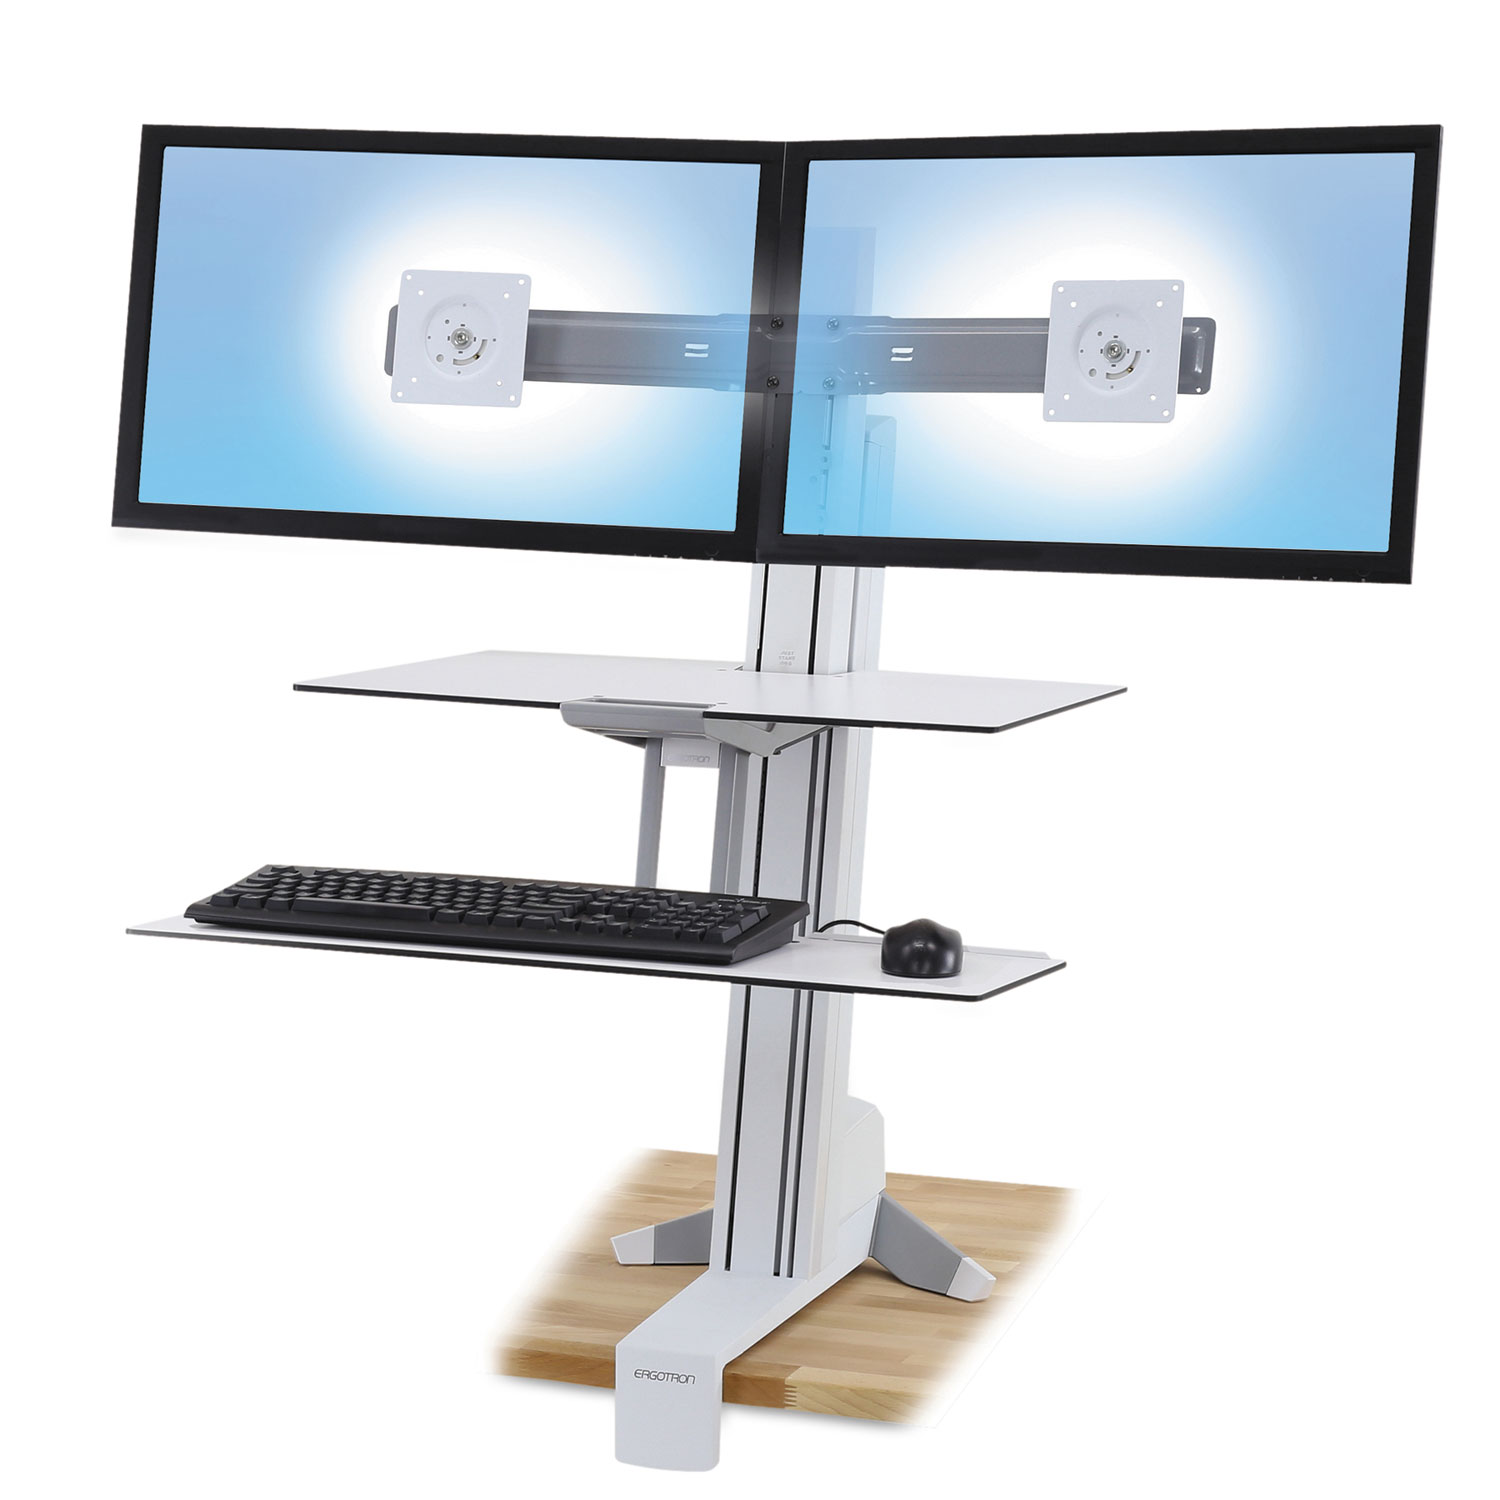  WorkFit by Ergotron 33-349-211 WorkFit-S Sit-Stand Workstation with Worksurface+,Dual LCD Monitors, 27w x 30.25d x 35h, White (ERG33349211) 